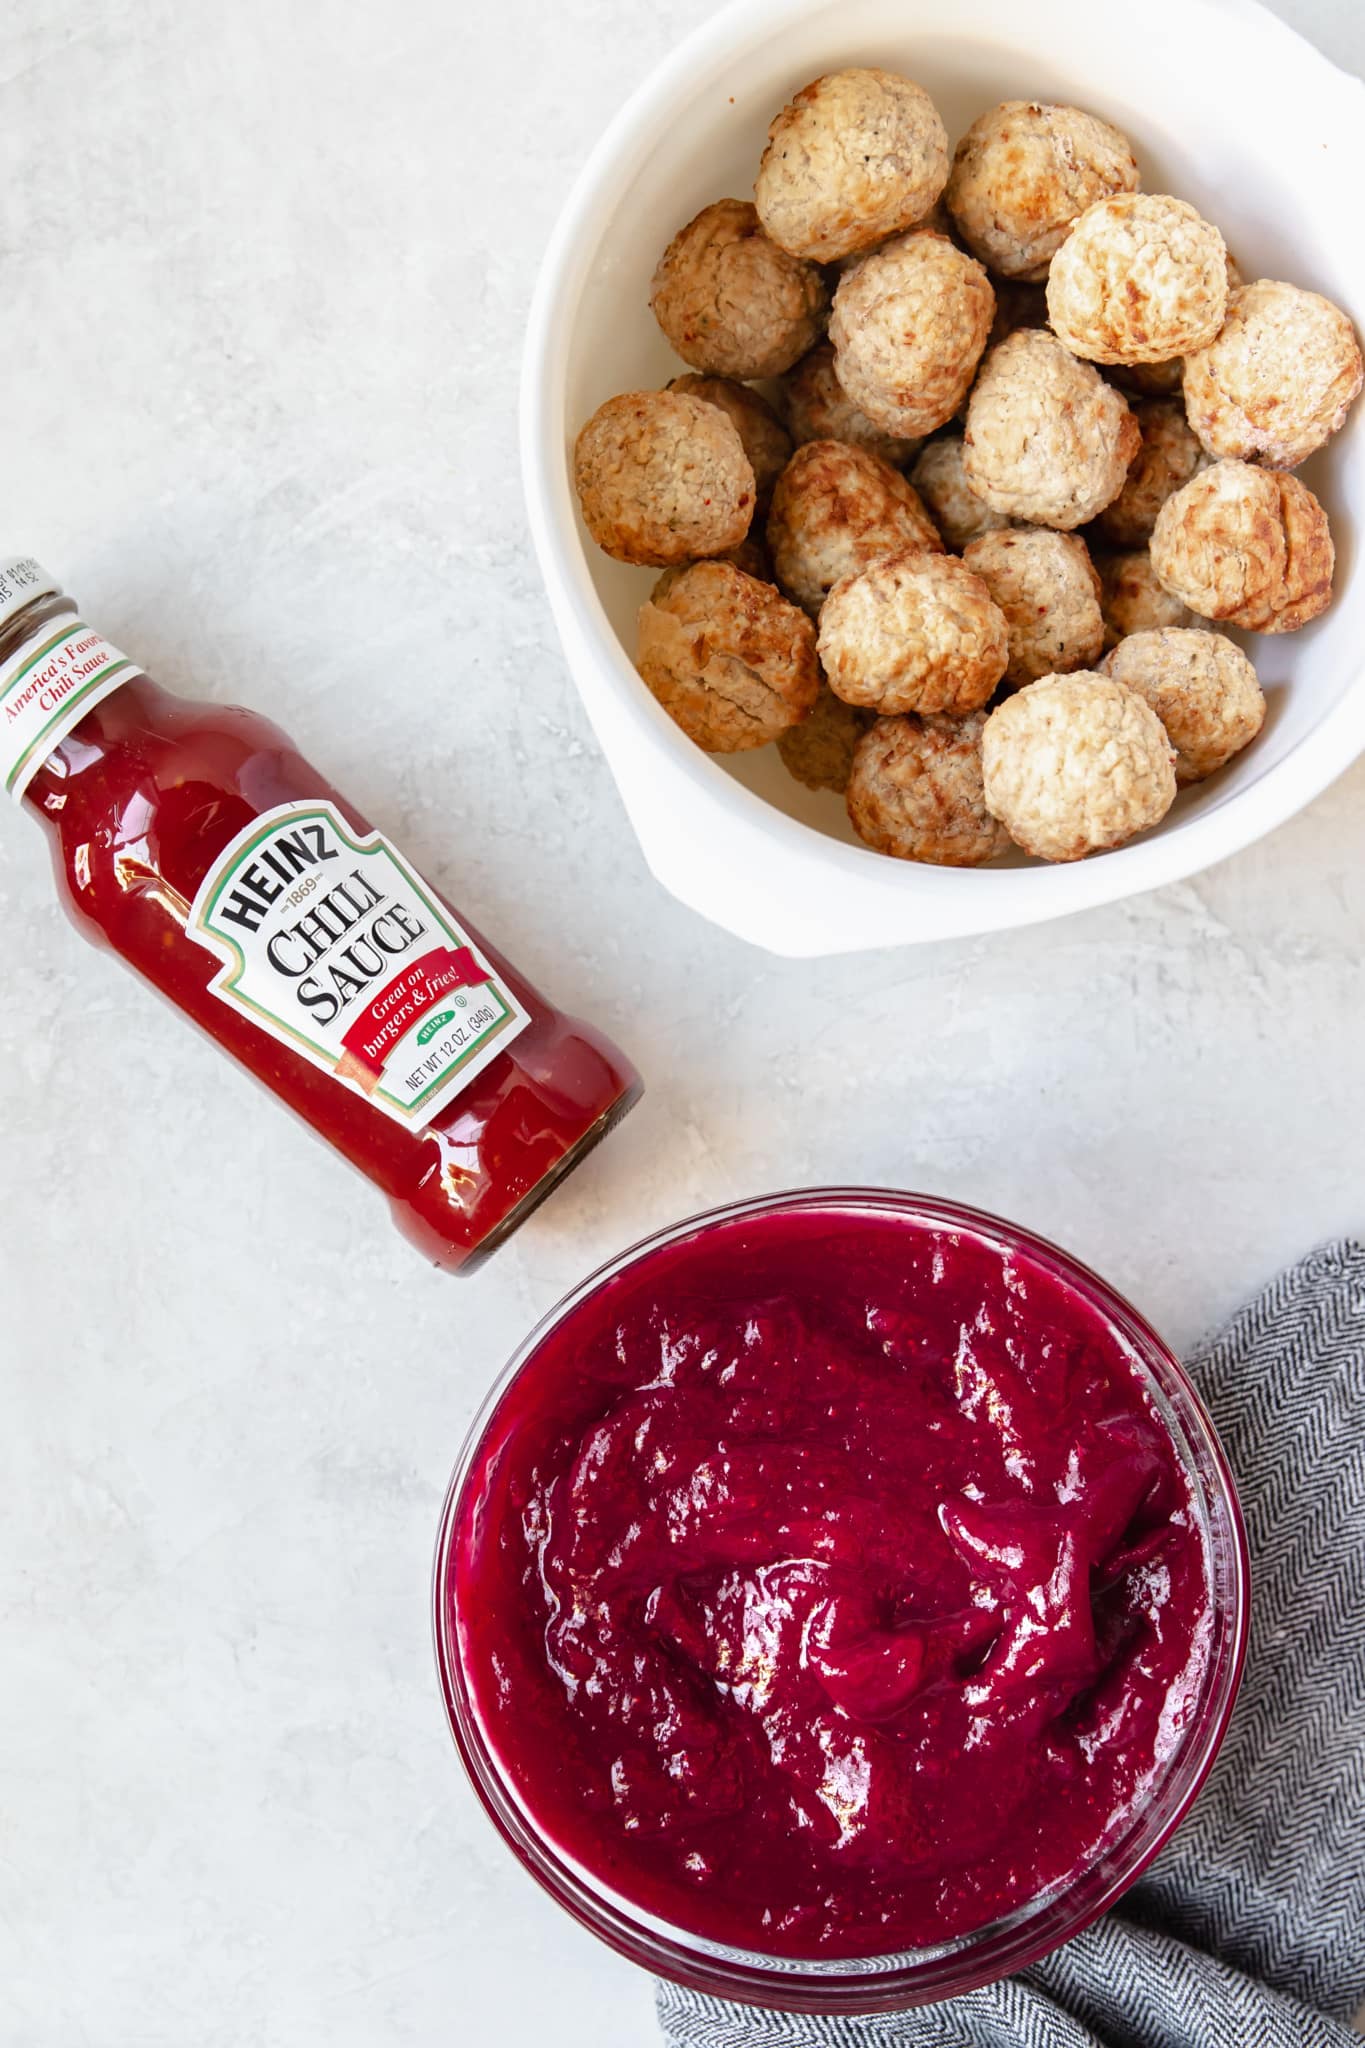 cranberry sauce in a glass bowl, a bottle of chili sauce and frozen meatballs in a white bowl